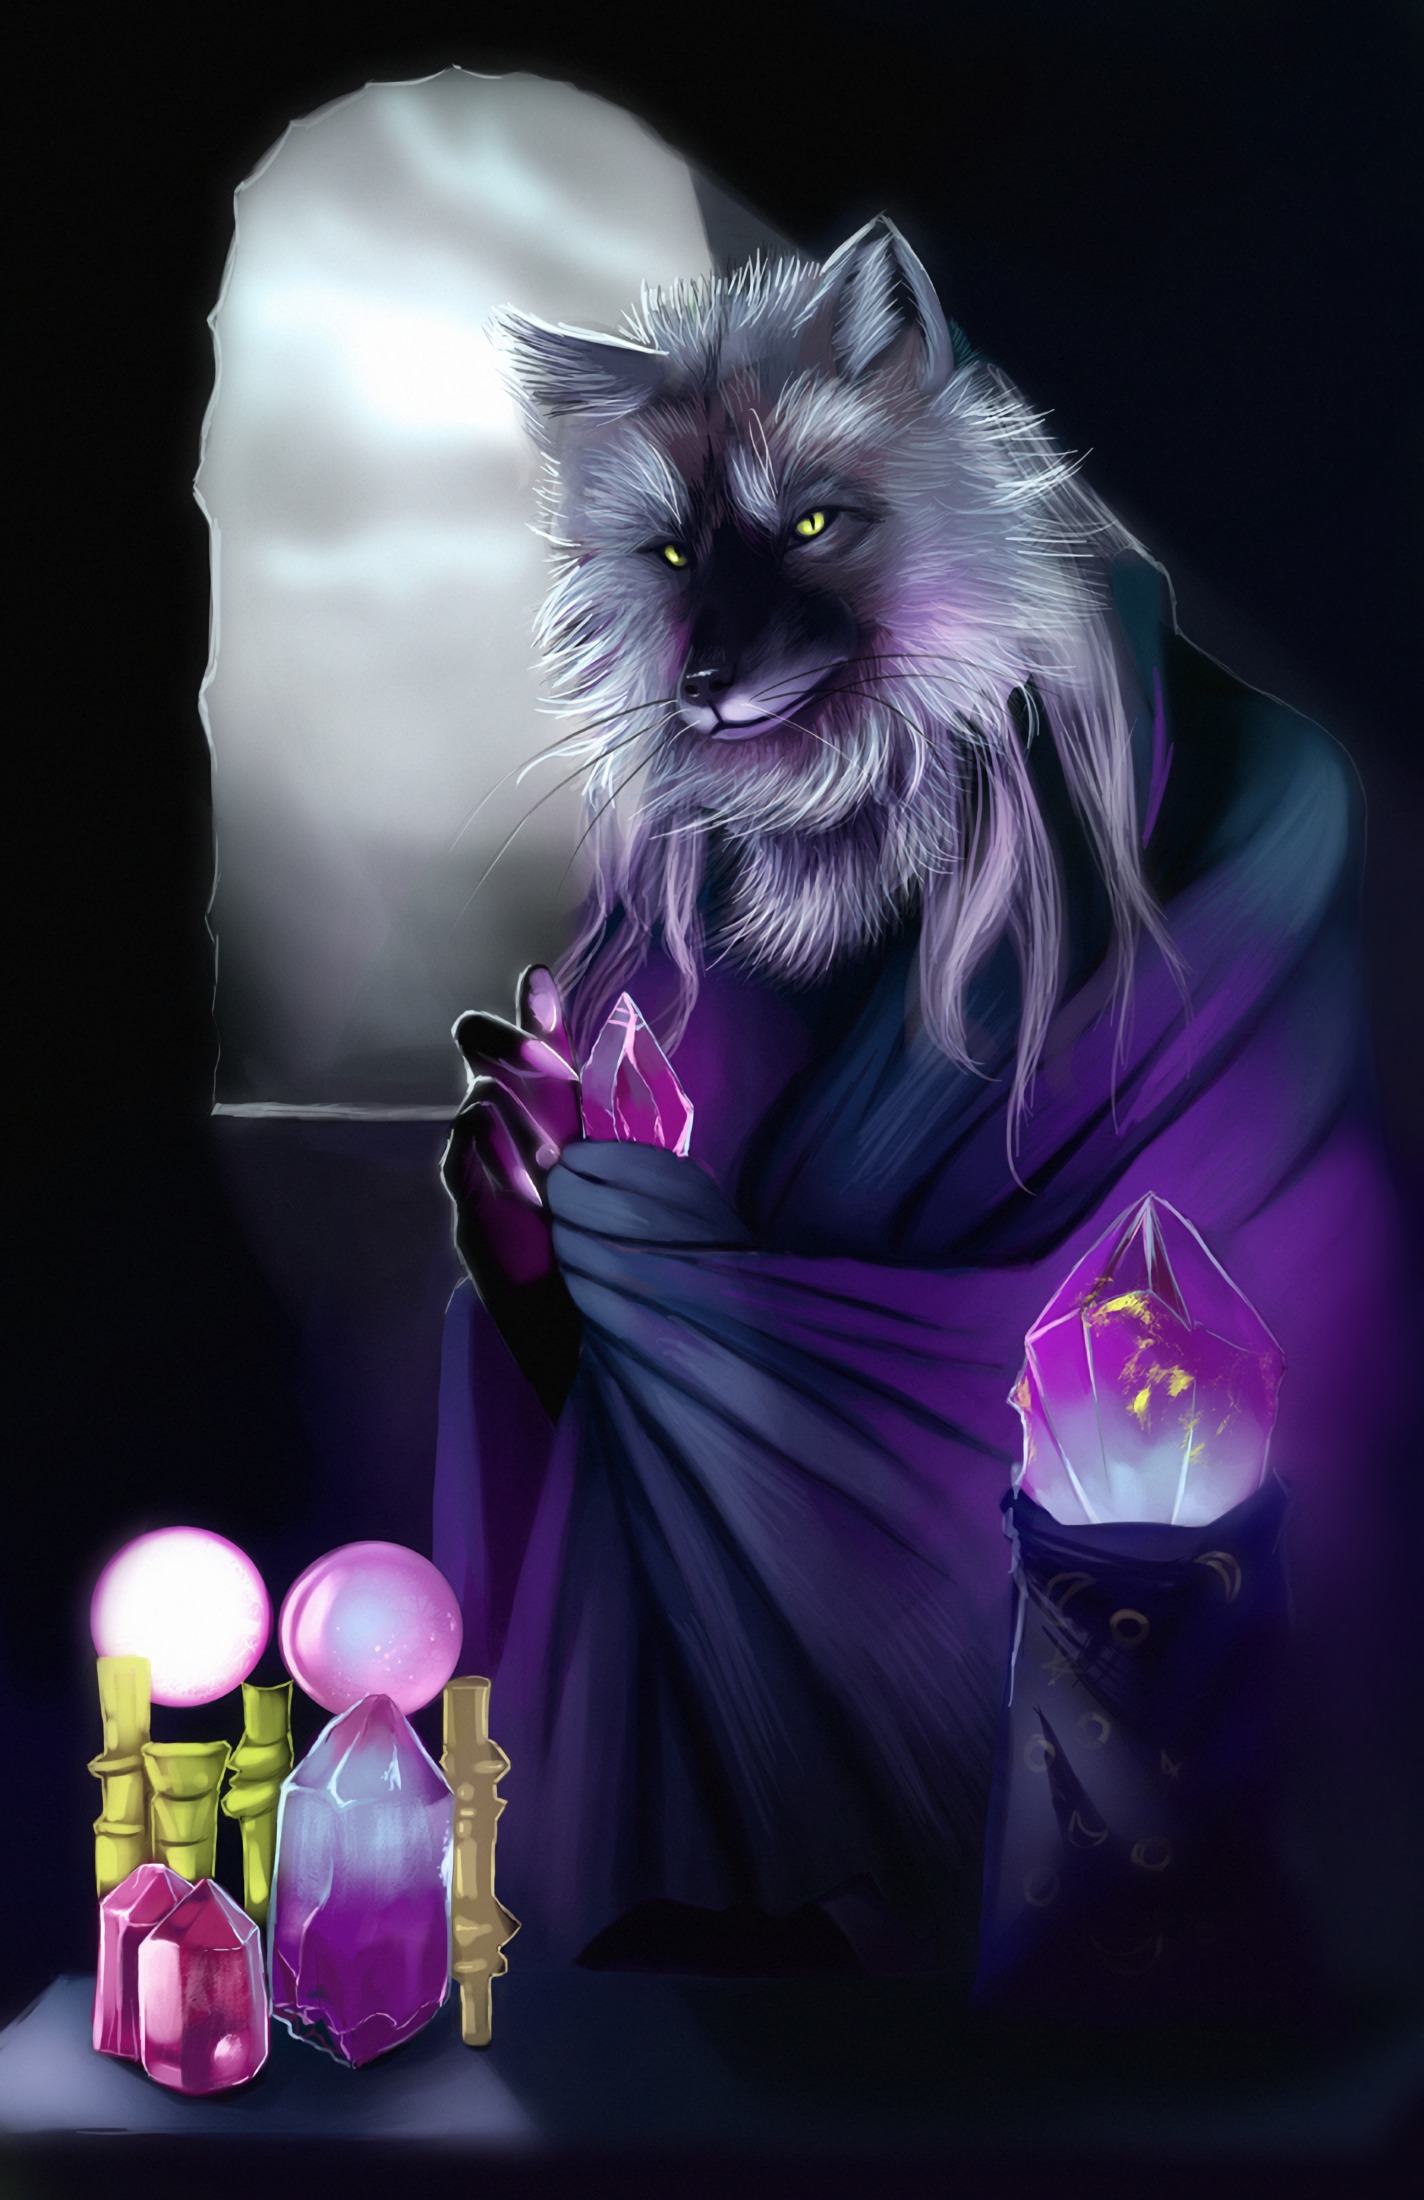 crystals, alchemist, art, wolf collection of HD images